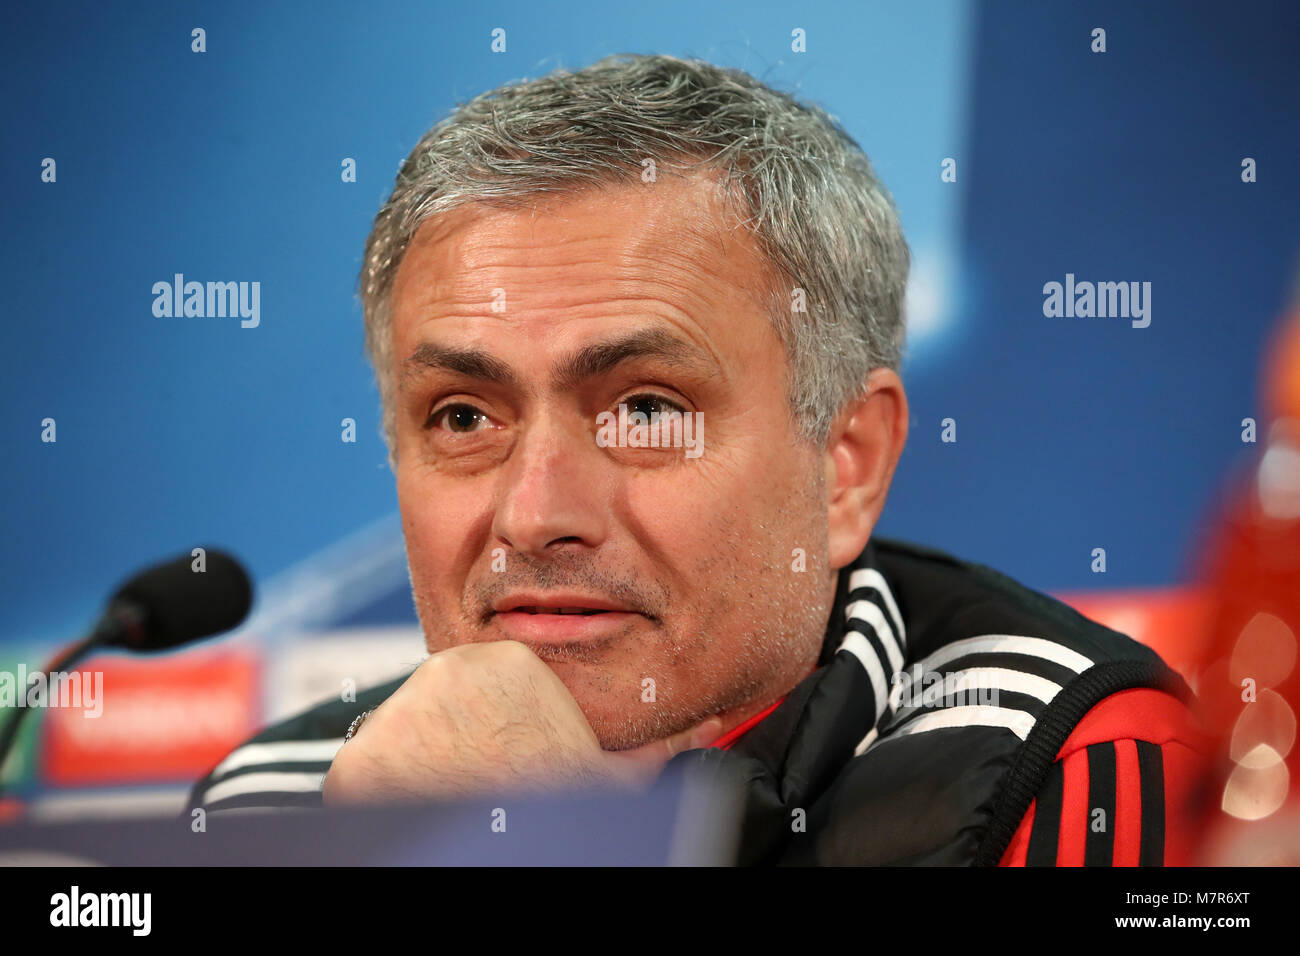 Manchester United manager Jose Mourinho during the press conference at Old Trafford, Manchester. PRESS ASSOCIATION Photo. Picture date: Monday March 12, 2018. See PA story SOCCER Man Utd. Photo credit should read: Martin Rickett/PA Wire Stock Photo